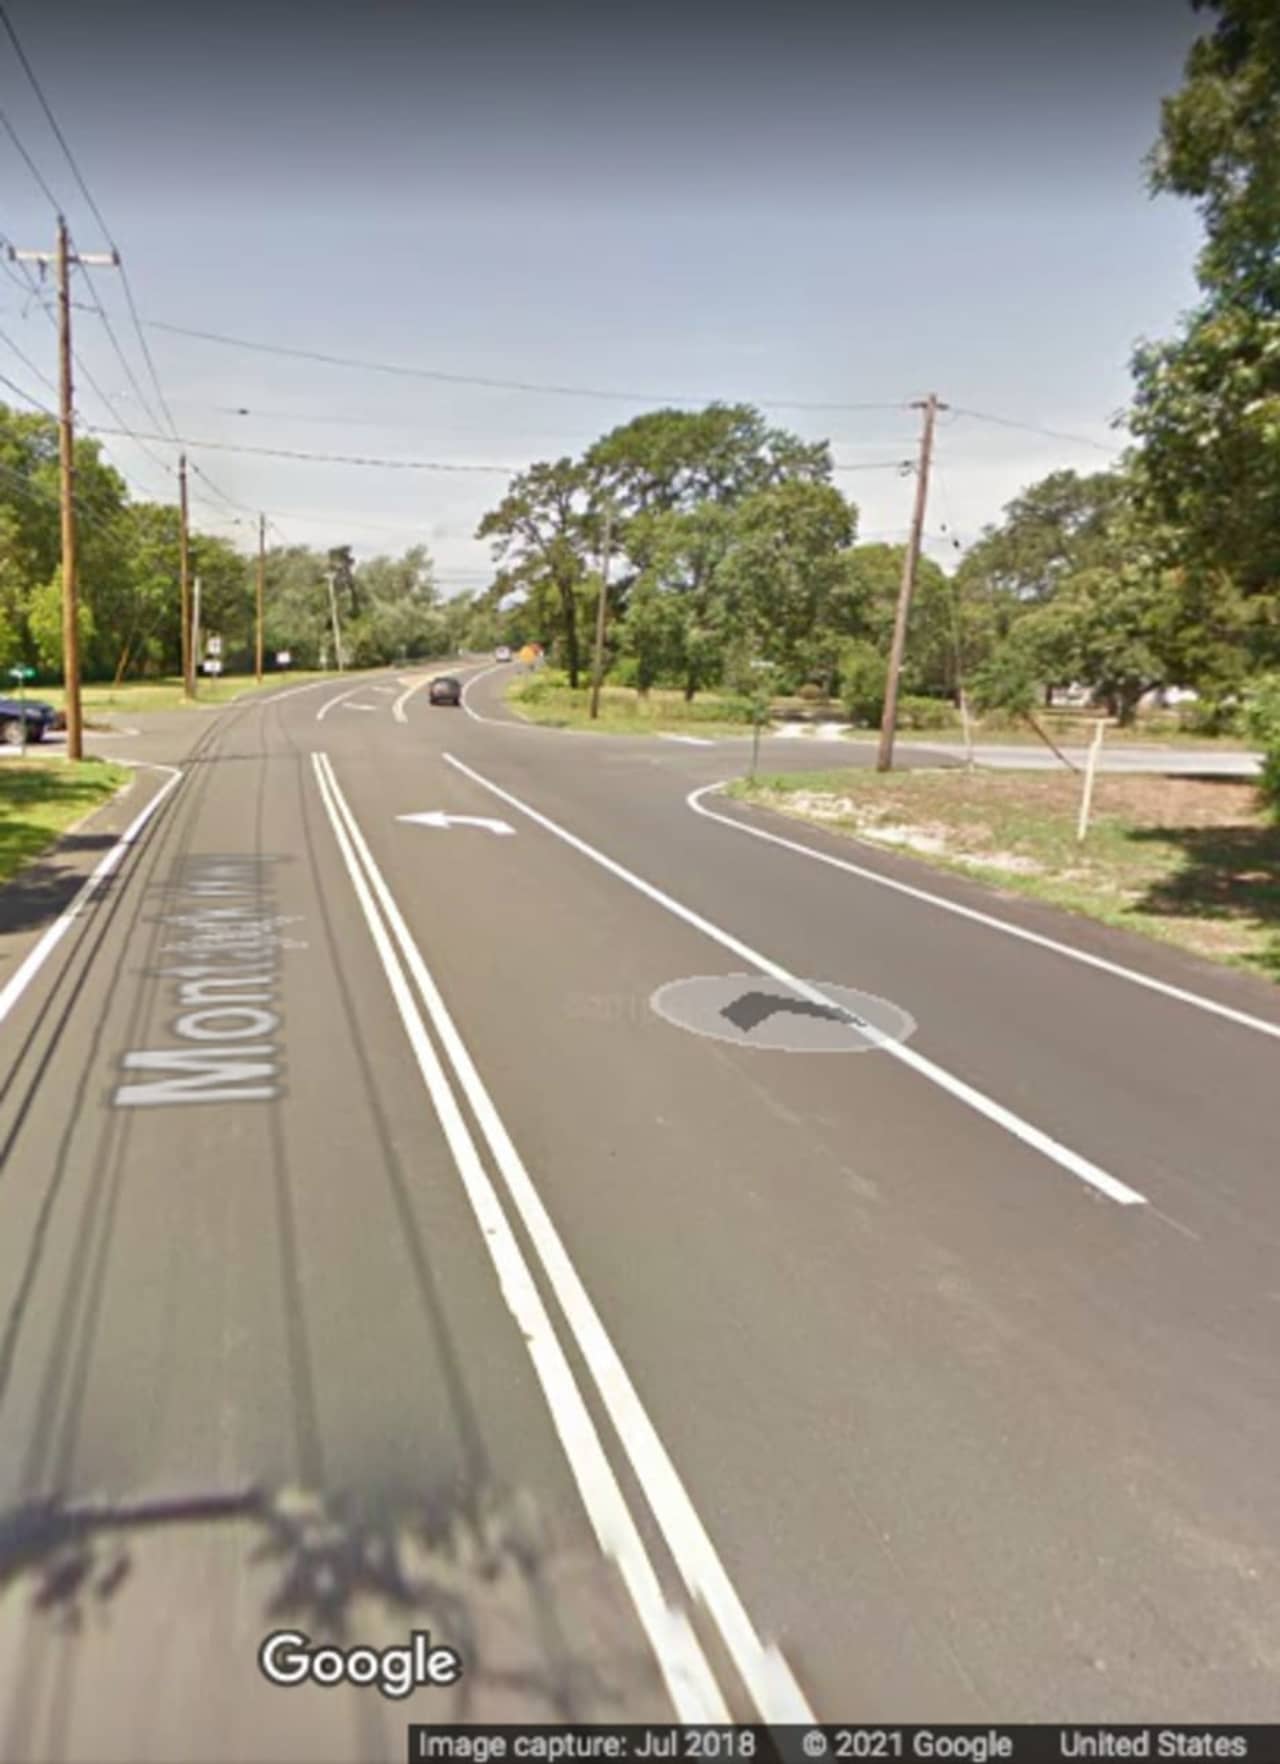 Authorities said the crash happened at about 11:20 p.m. Saturday, July 24, on Long Island on Montauk Highway in Suffolk County, near the intersection of Quogue Street East in the Village of Quogue.